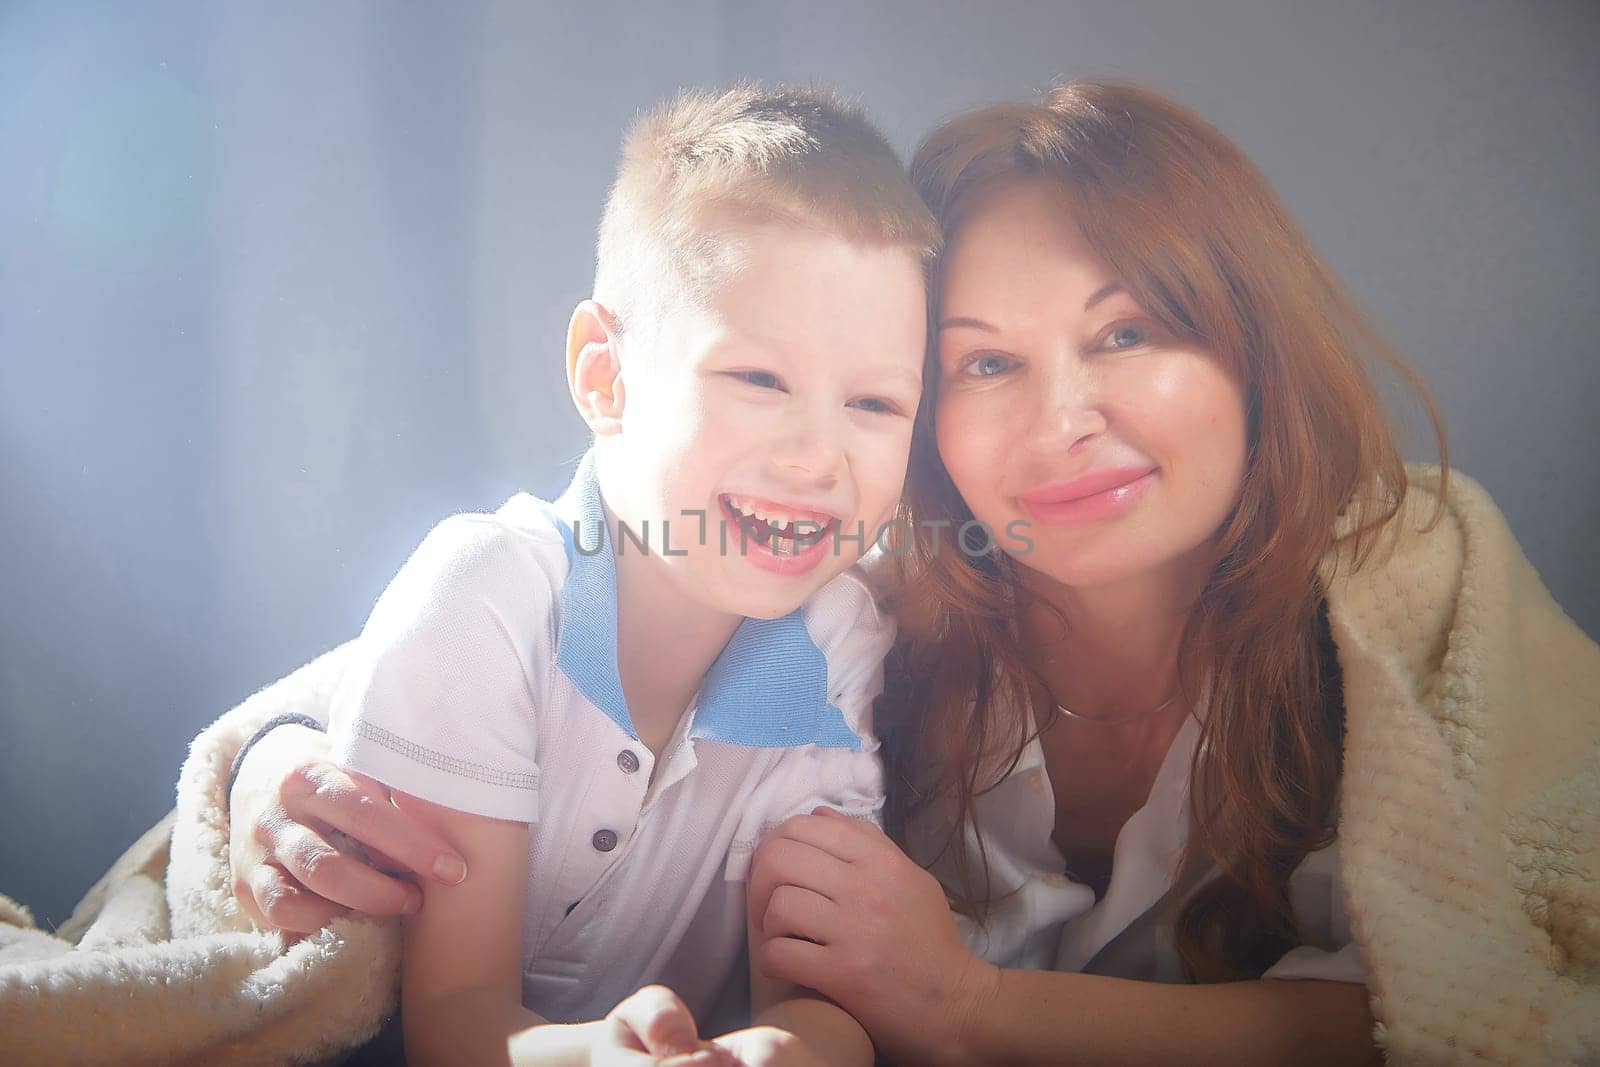 Woman with a boy. Mom with son on a white background. Family portrait with mother and boy having fun together by keleny